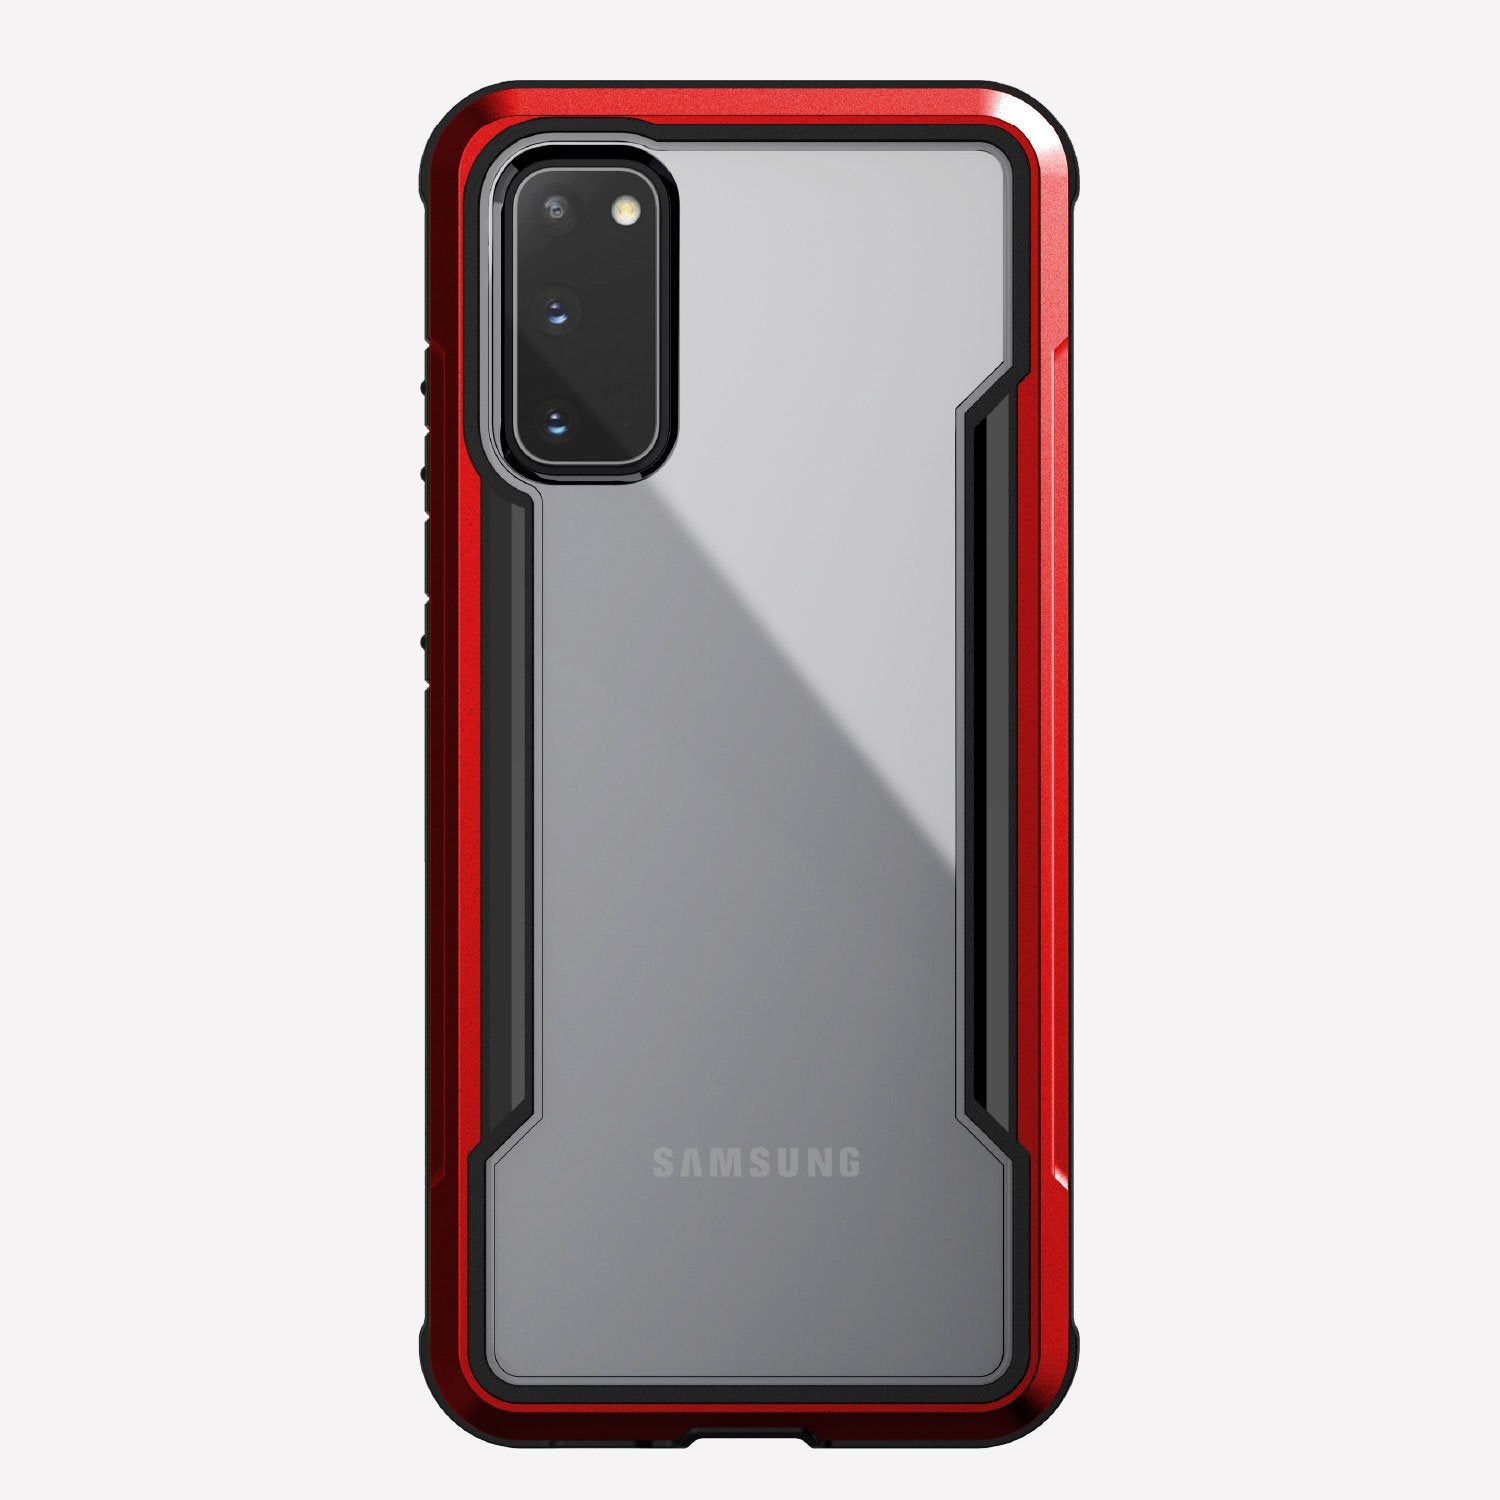 Defense shield red with Galaxy S20 in it showing the back view with the red color on the back panel and that it's transparent